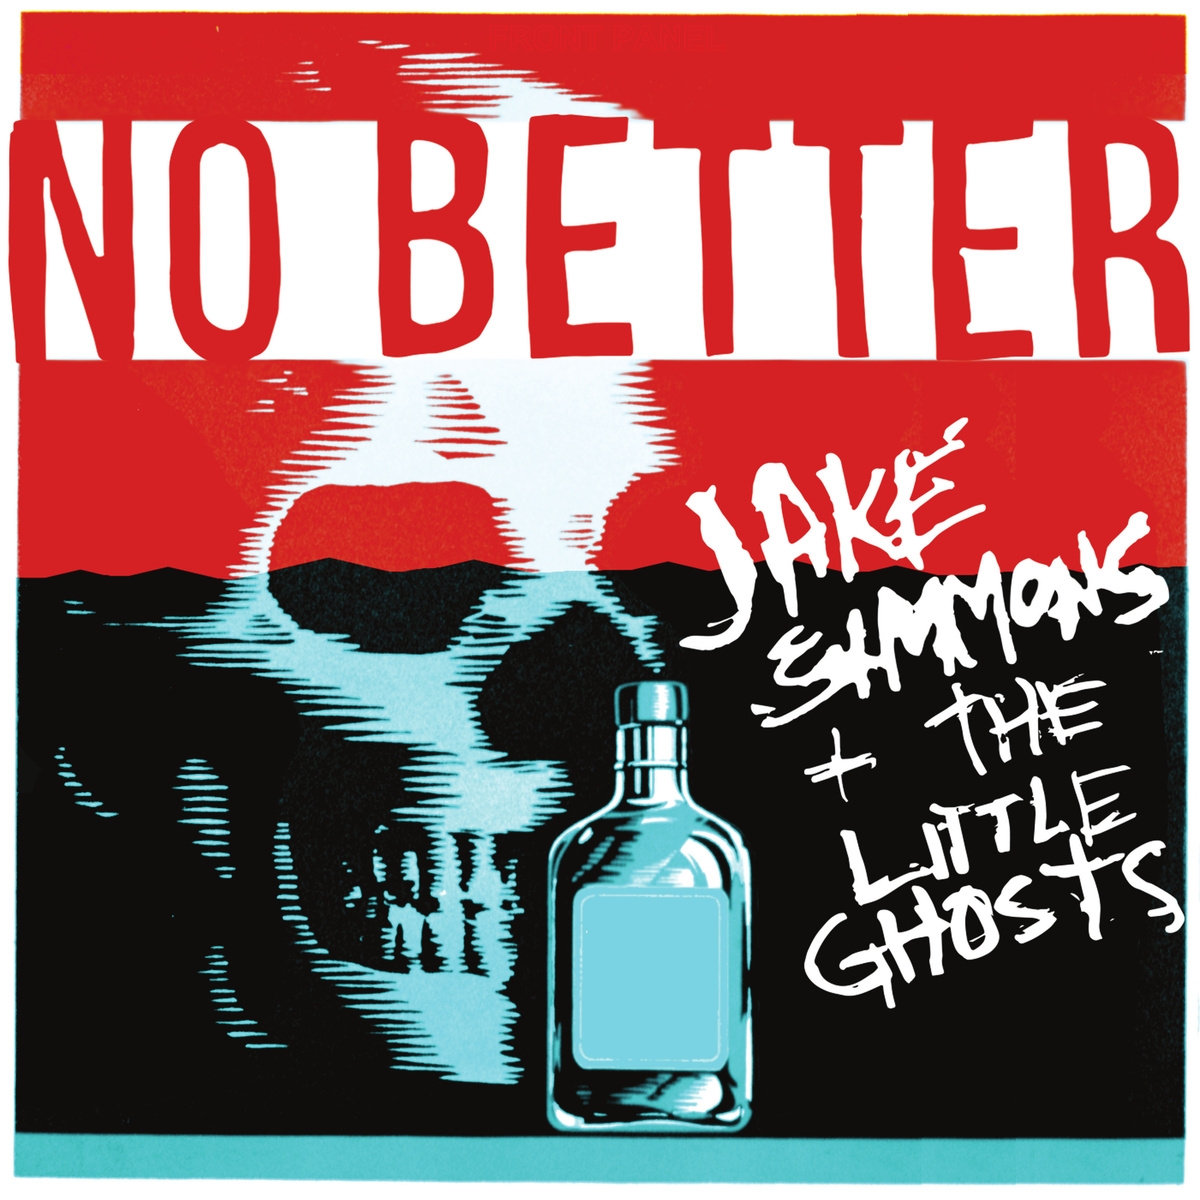 LISTEN to a new Jake Simmons & the Little Ghosts Song